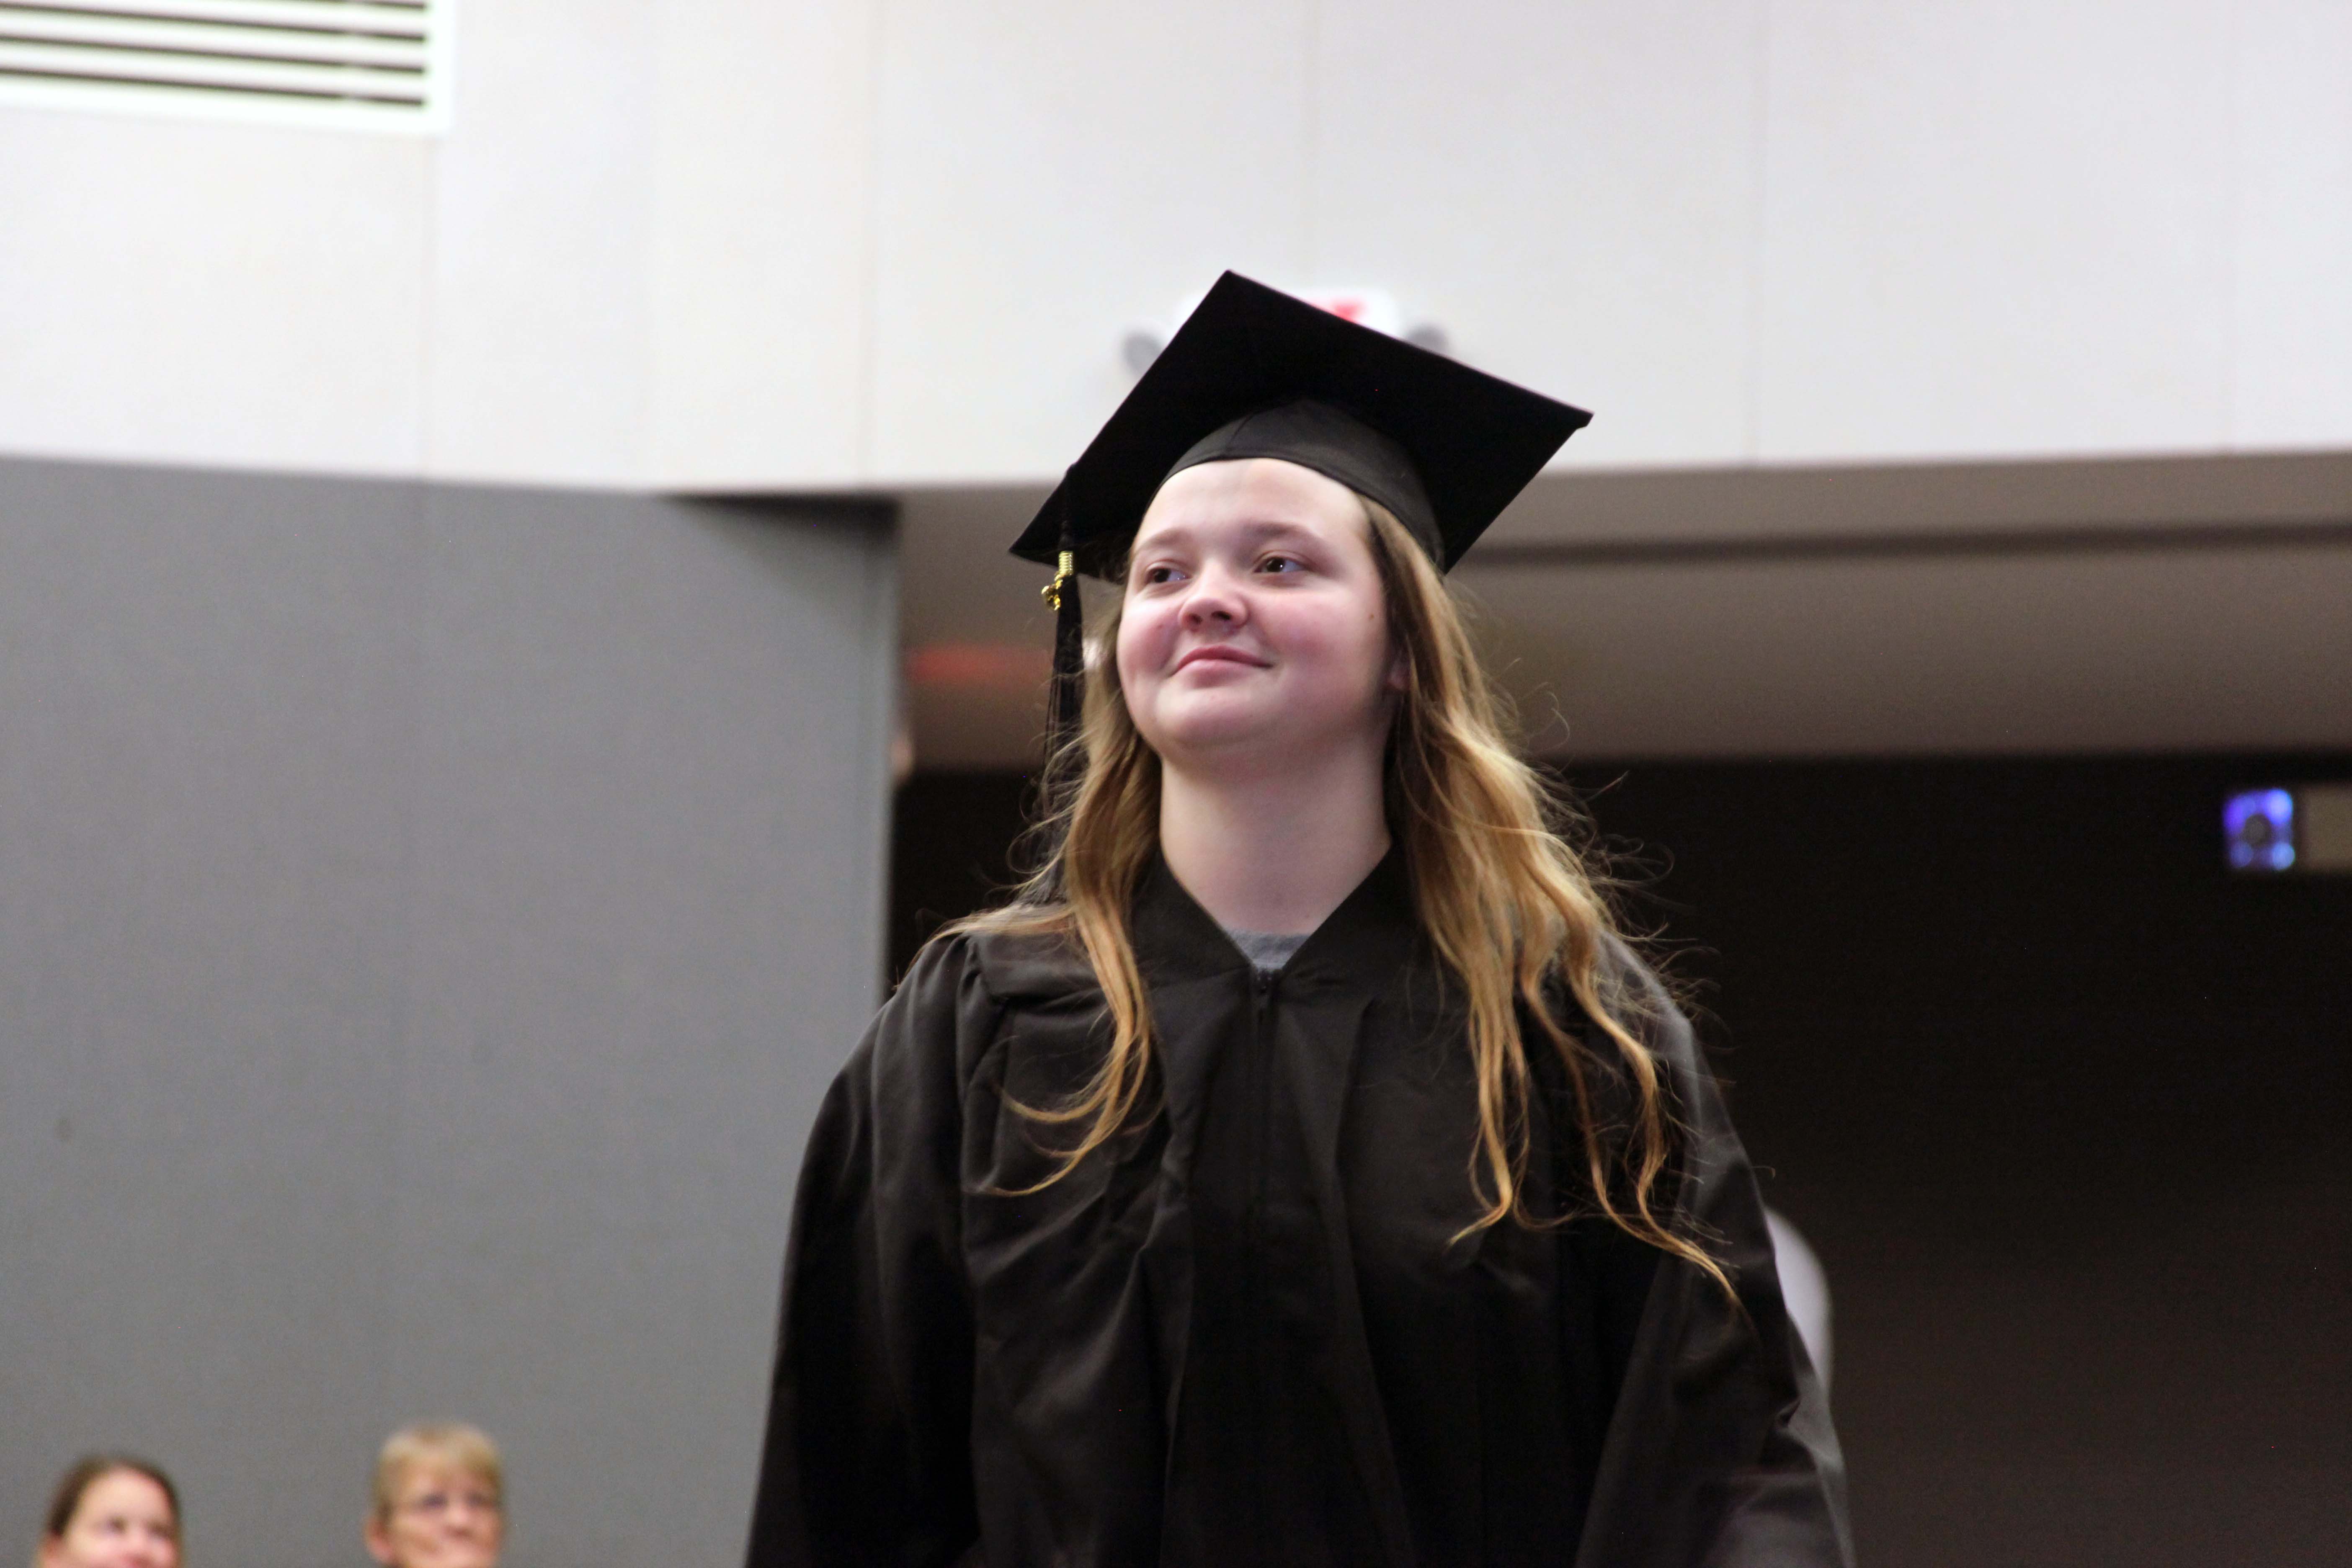 Lexington Fisher walks into the auditorium on the GNTC Floyd County Campus just before receiving her GED® diploma from the Youth Success Academy.